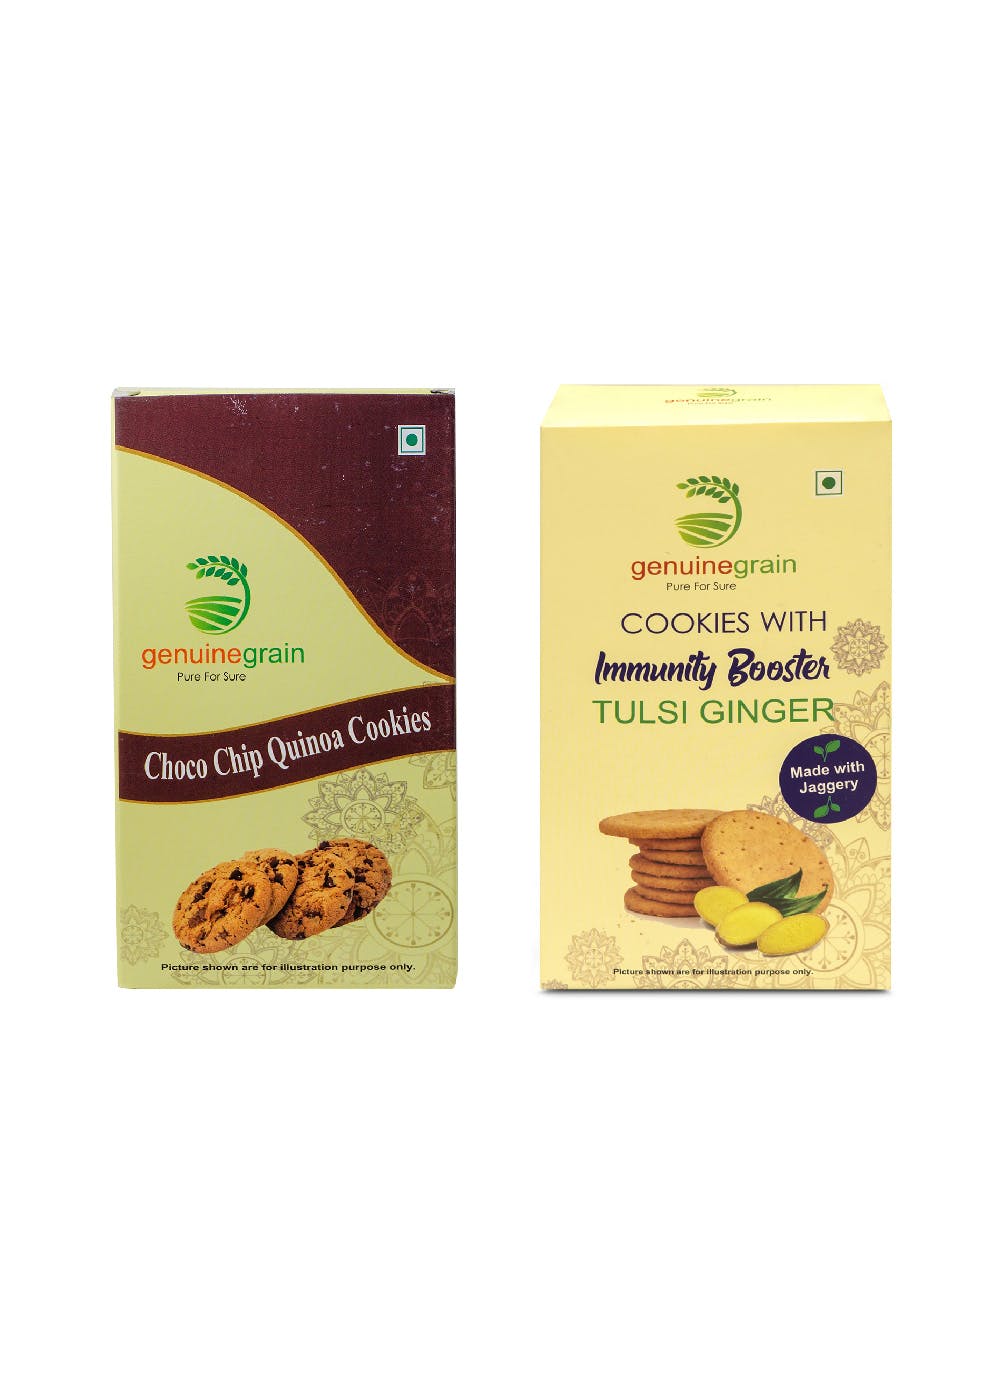 Tulsi Ginger Cookies Made with Jaggery and Choco Chip Quinoa Cookies Combo - 200 Grams Each